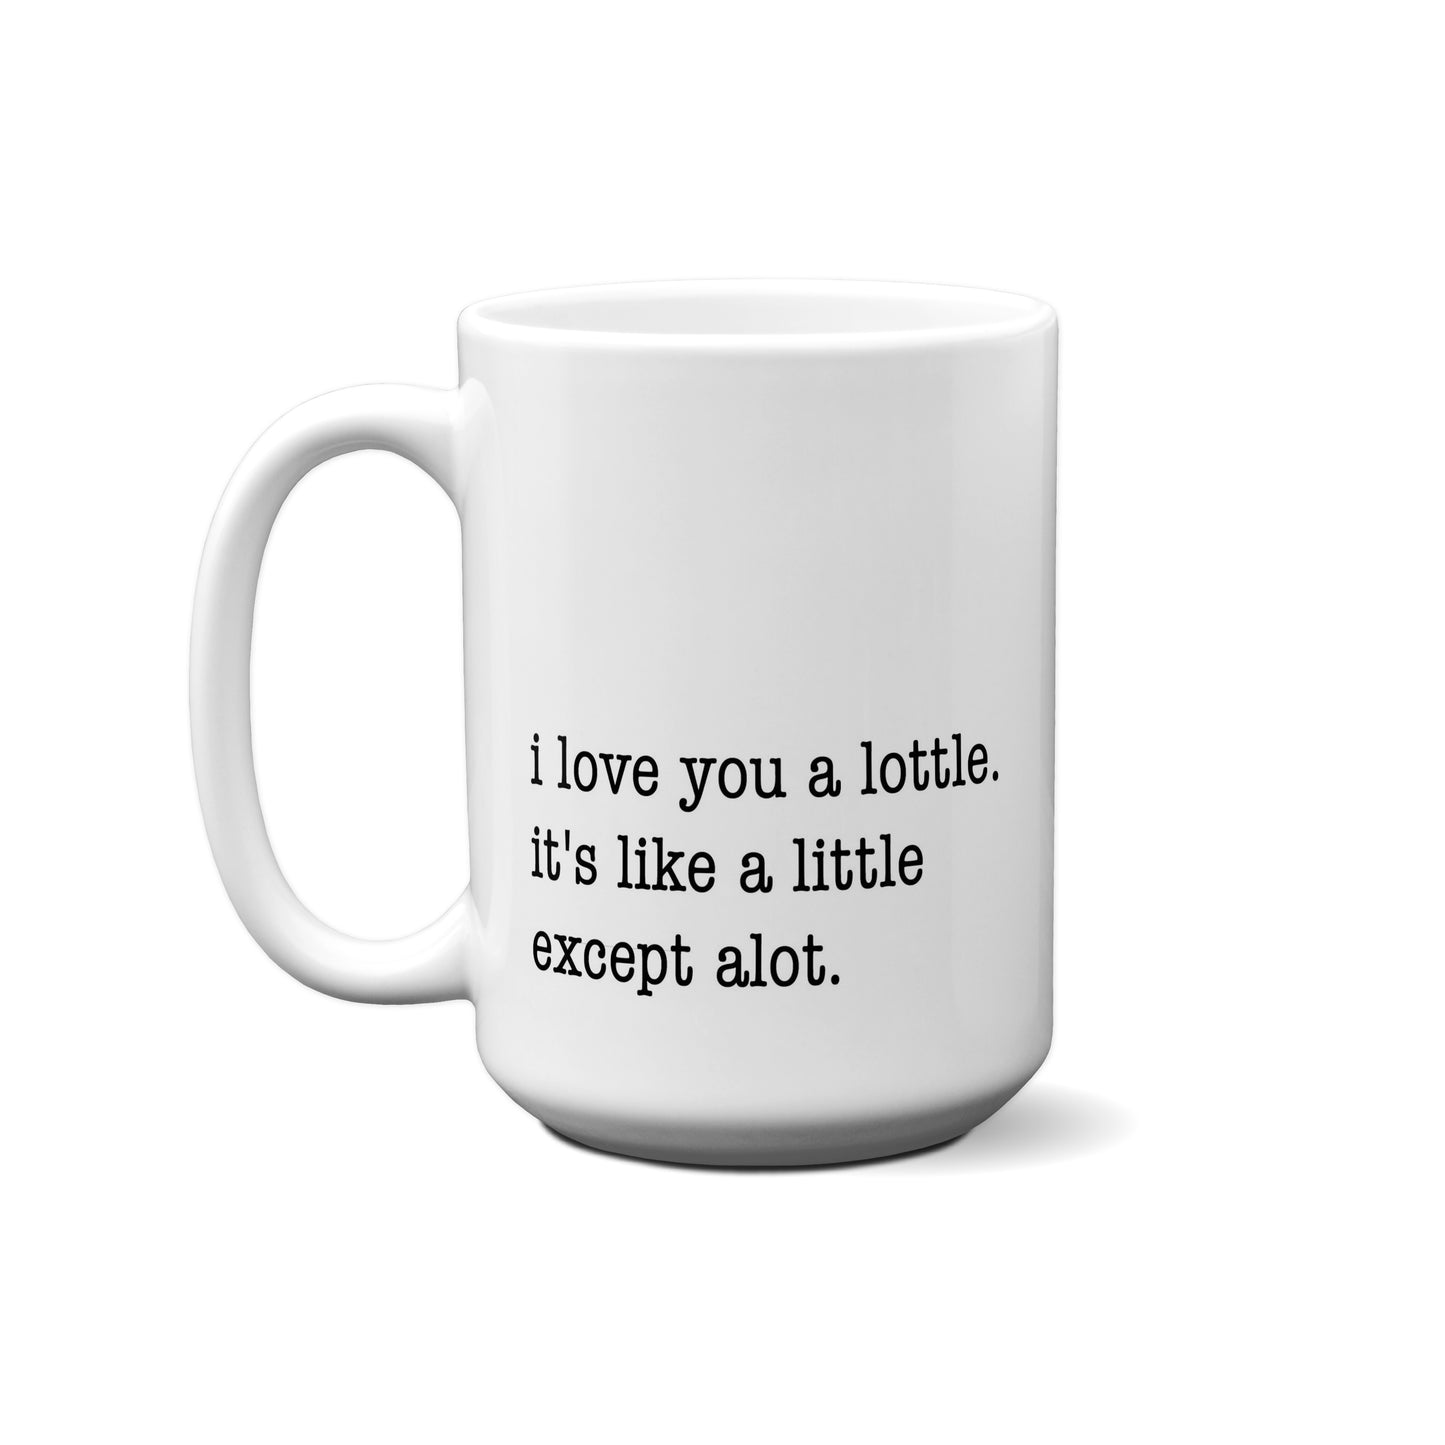 I Love You A Lottle. It's Like A Little Except Alot. Quote Mug